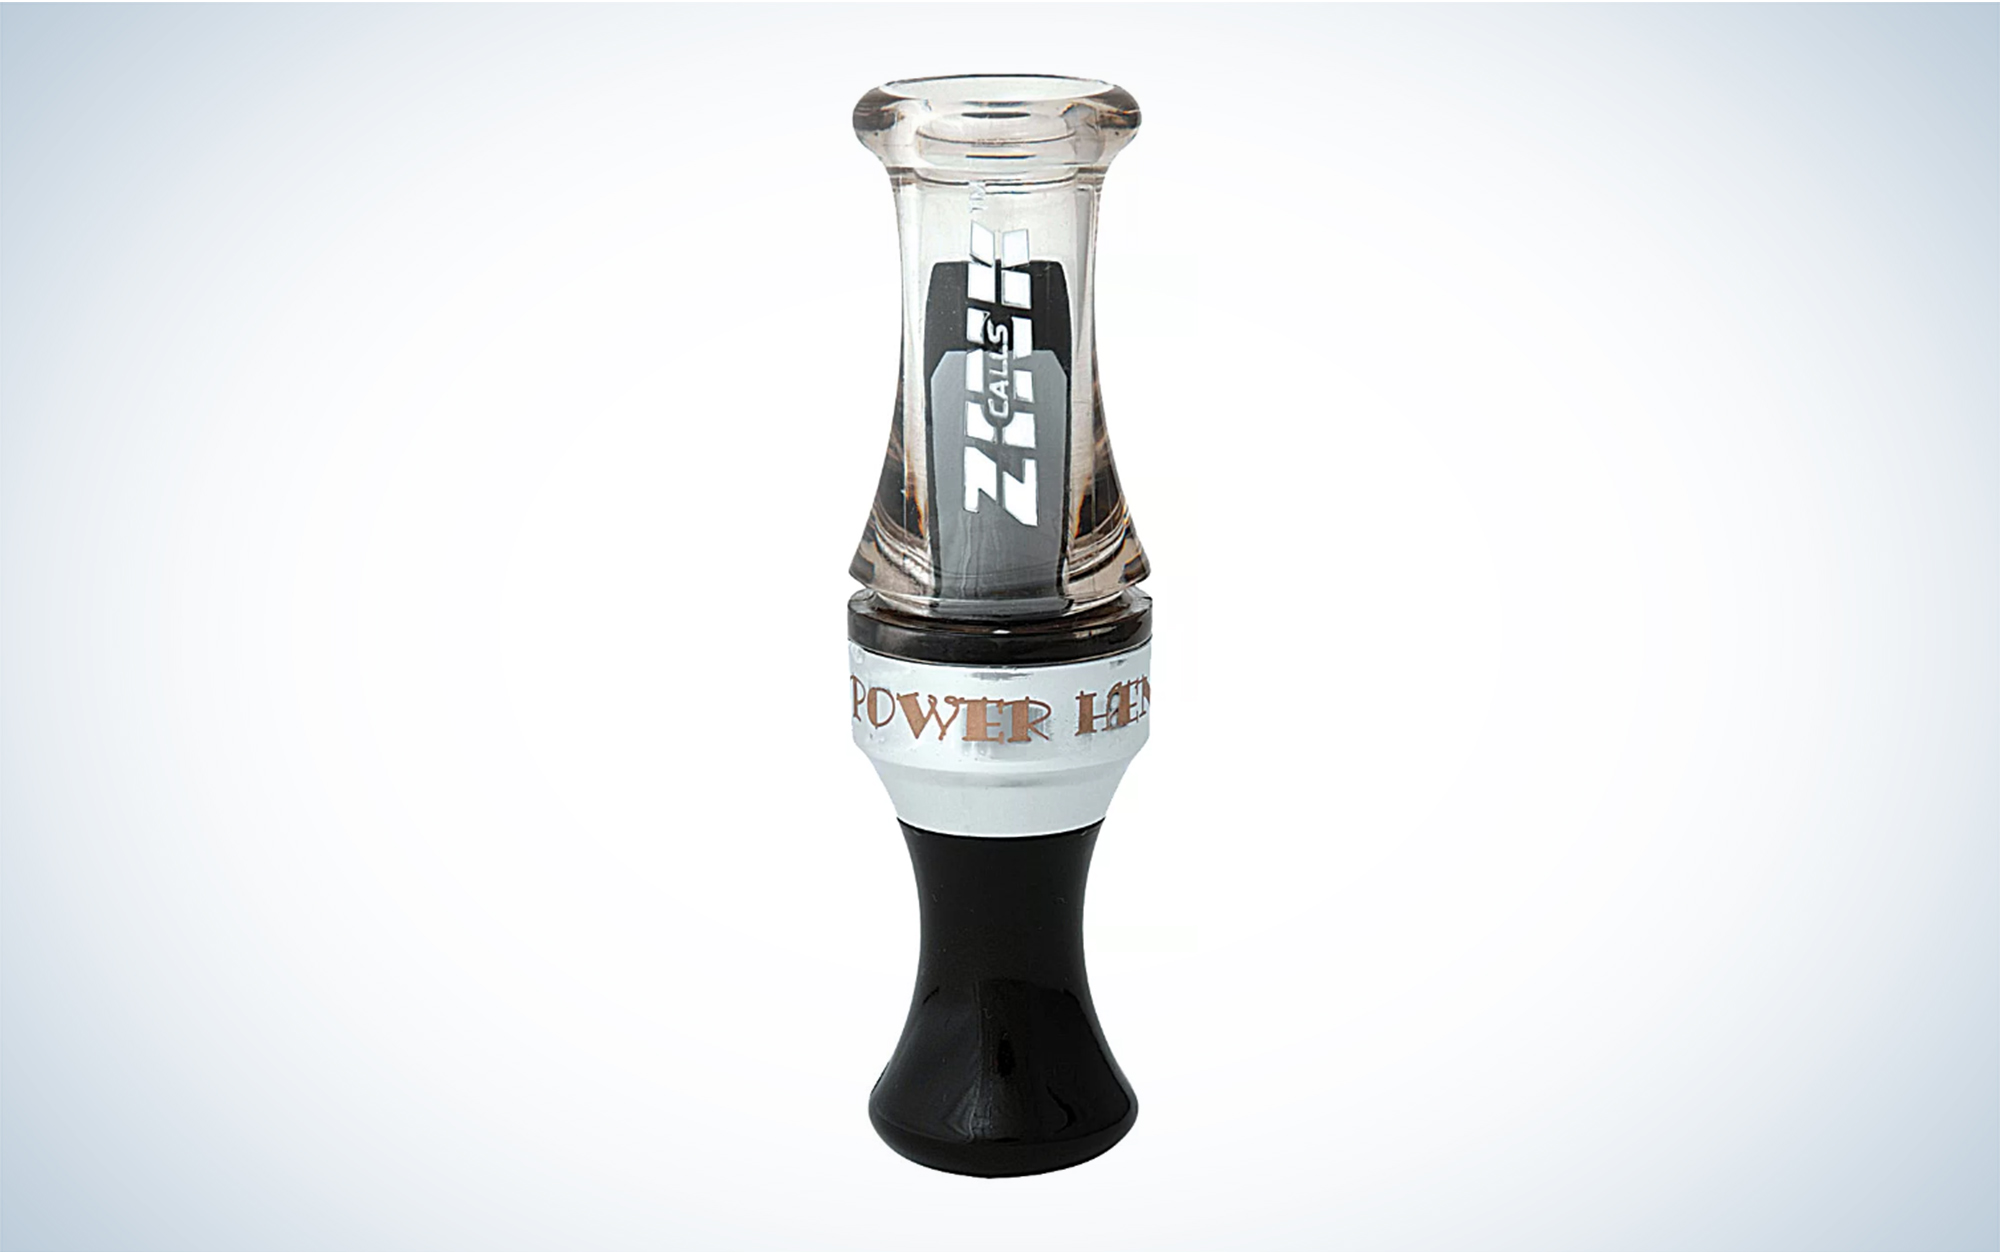 The Zink Power Hen-1 is the best budget duck call.